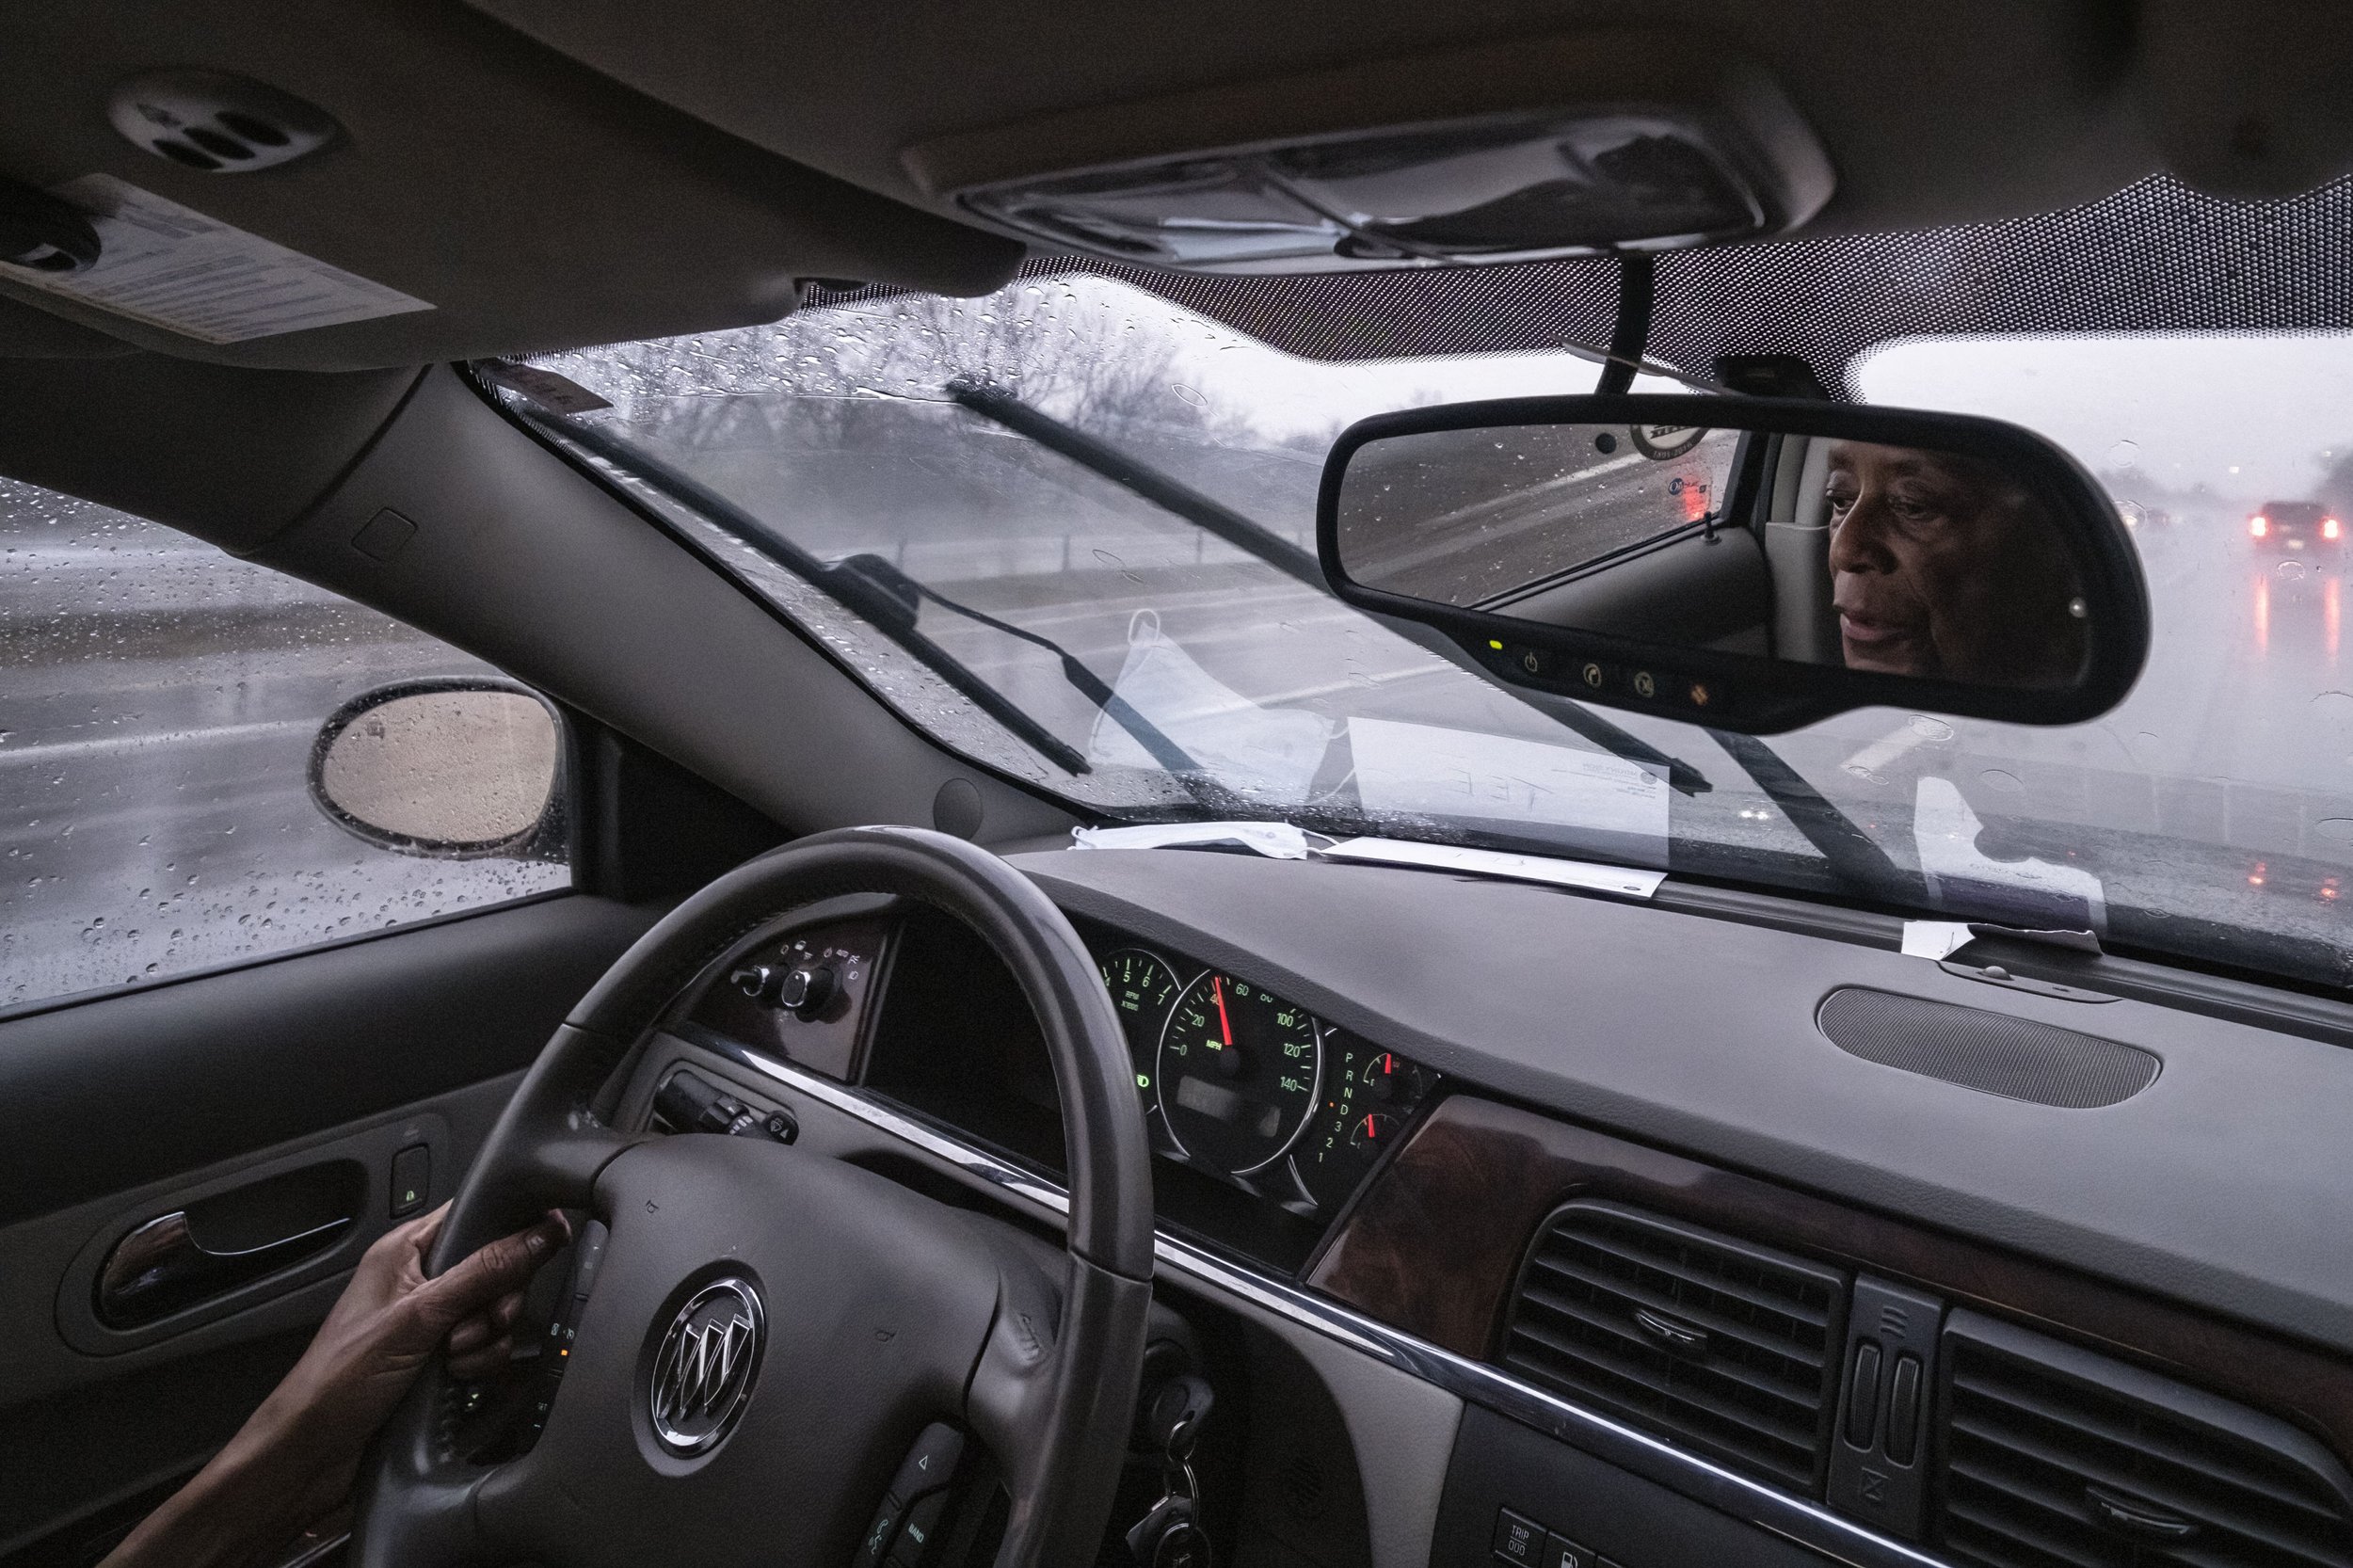  Dr. Tee Ford-Ahmed drives amid rain and windy weather conditions on the U.S. 33 between Lancaster and Columbus, Ohio, to pick up her grandson Demetri Wolfe from John Glenn International Airport, Wednesday April 5, 2023.  